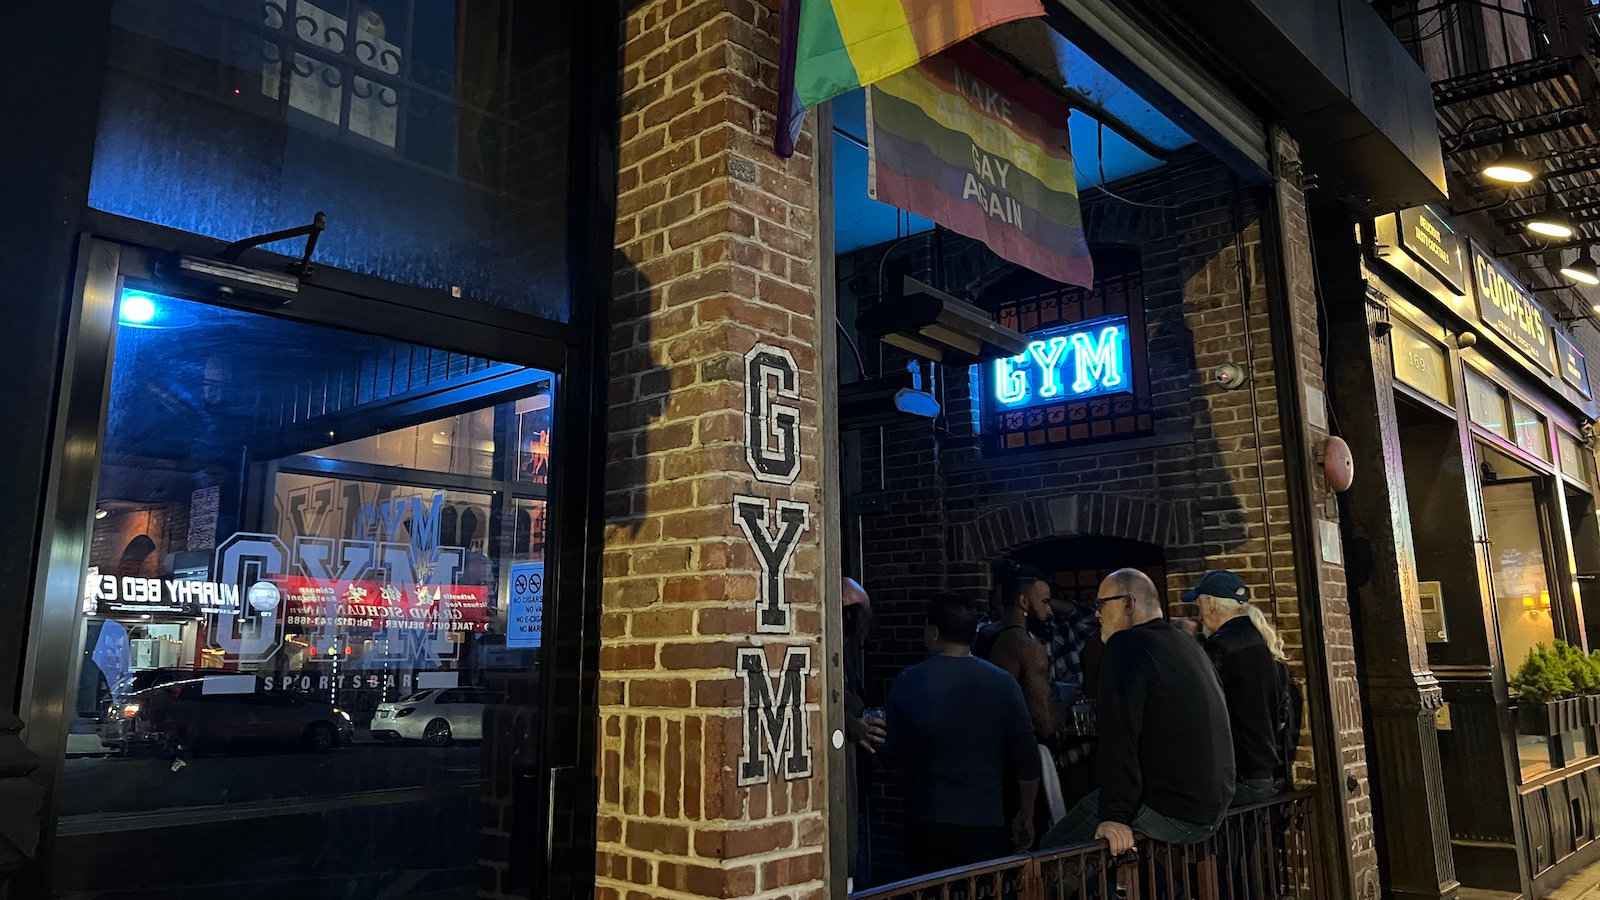 Some patrons sitting at the entrance to Gym gay bar in New York City, with rainbow flags flying.